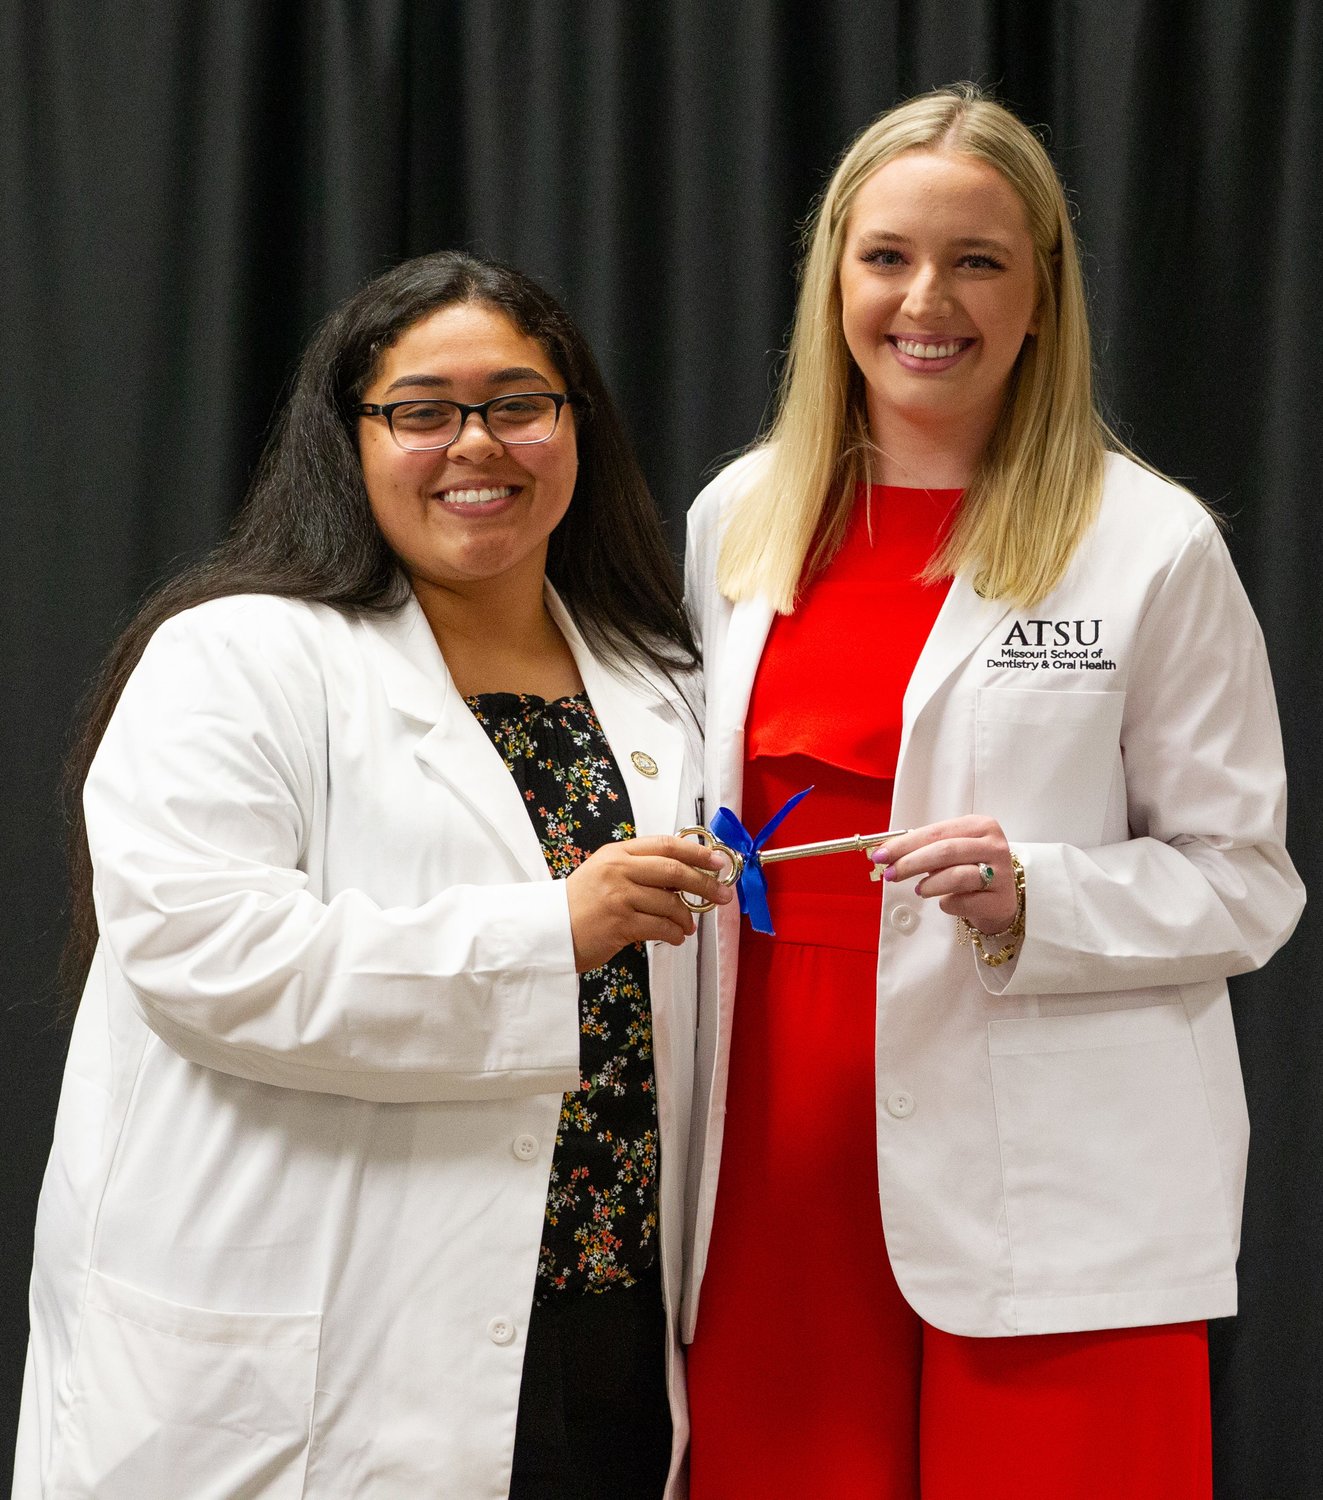 Second-year A.T. Still University-Missouri School of Dentistry &amp; Oral Health student Destiny Mills, left, presents a symbolic key to first-year ATSU-MOSDOH student Ashley Ingram during the White Coat Ceremony. The annual transfer represents the key to A.T. Still's log cabin and symbolizes the obligation first-year students have in preserving ATSU's heritage.